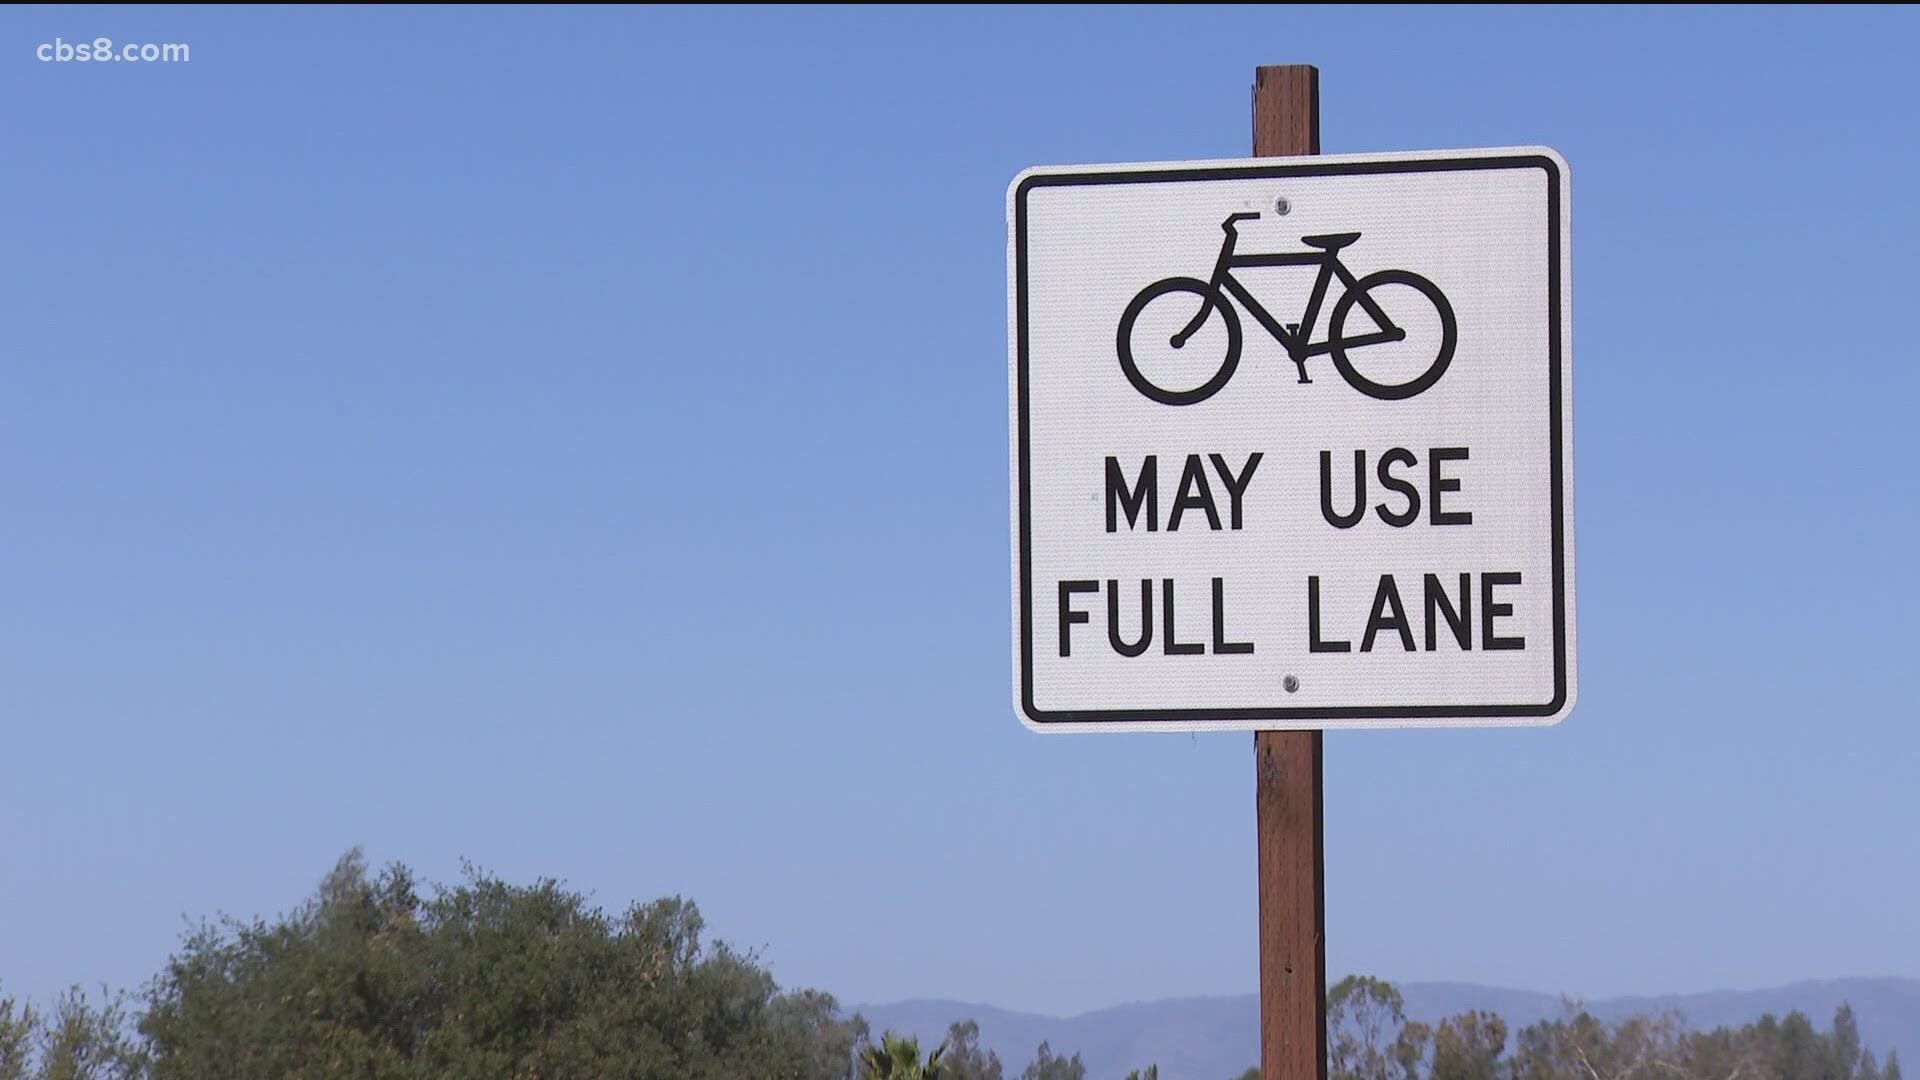 Long-time Ramona resident has concerns about bike riders in traffic lanes.